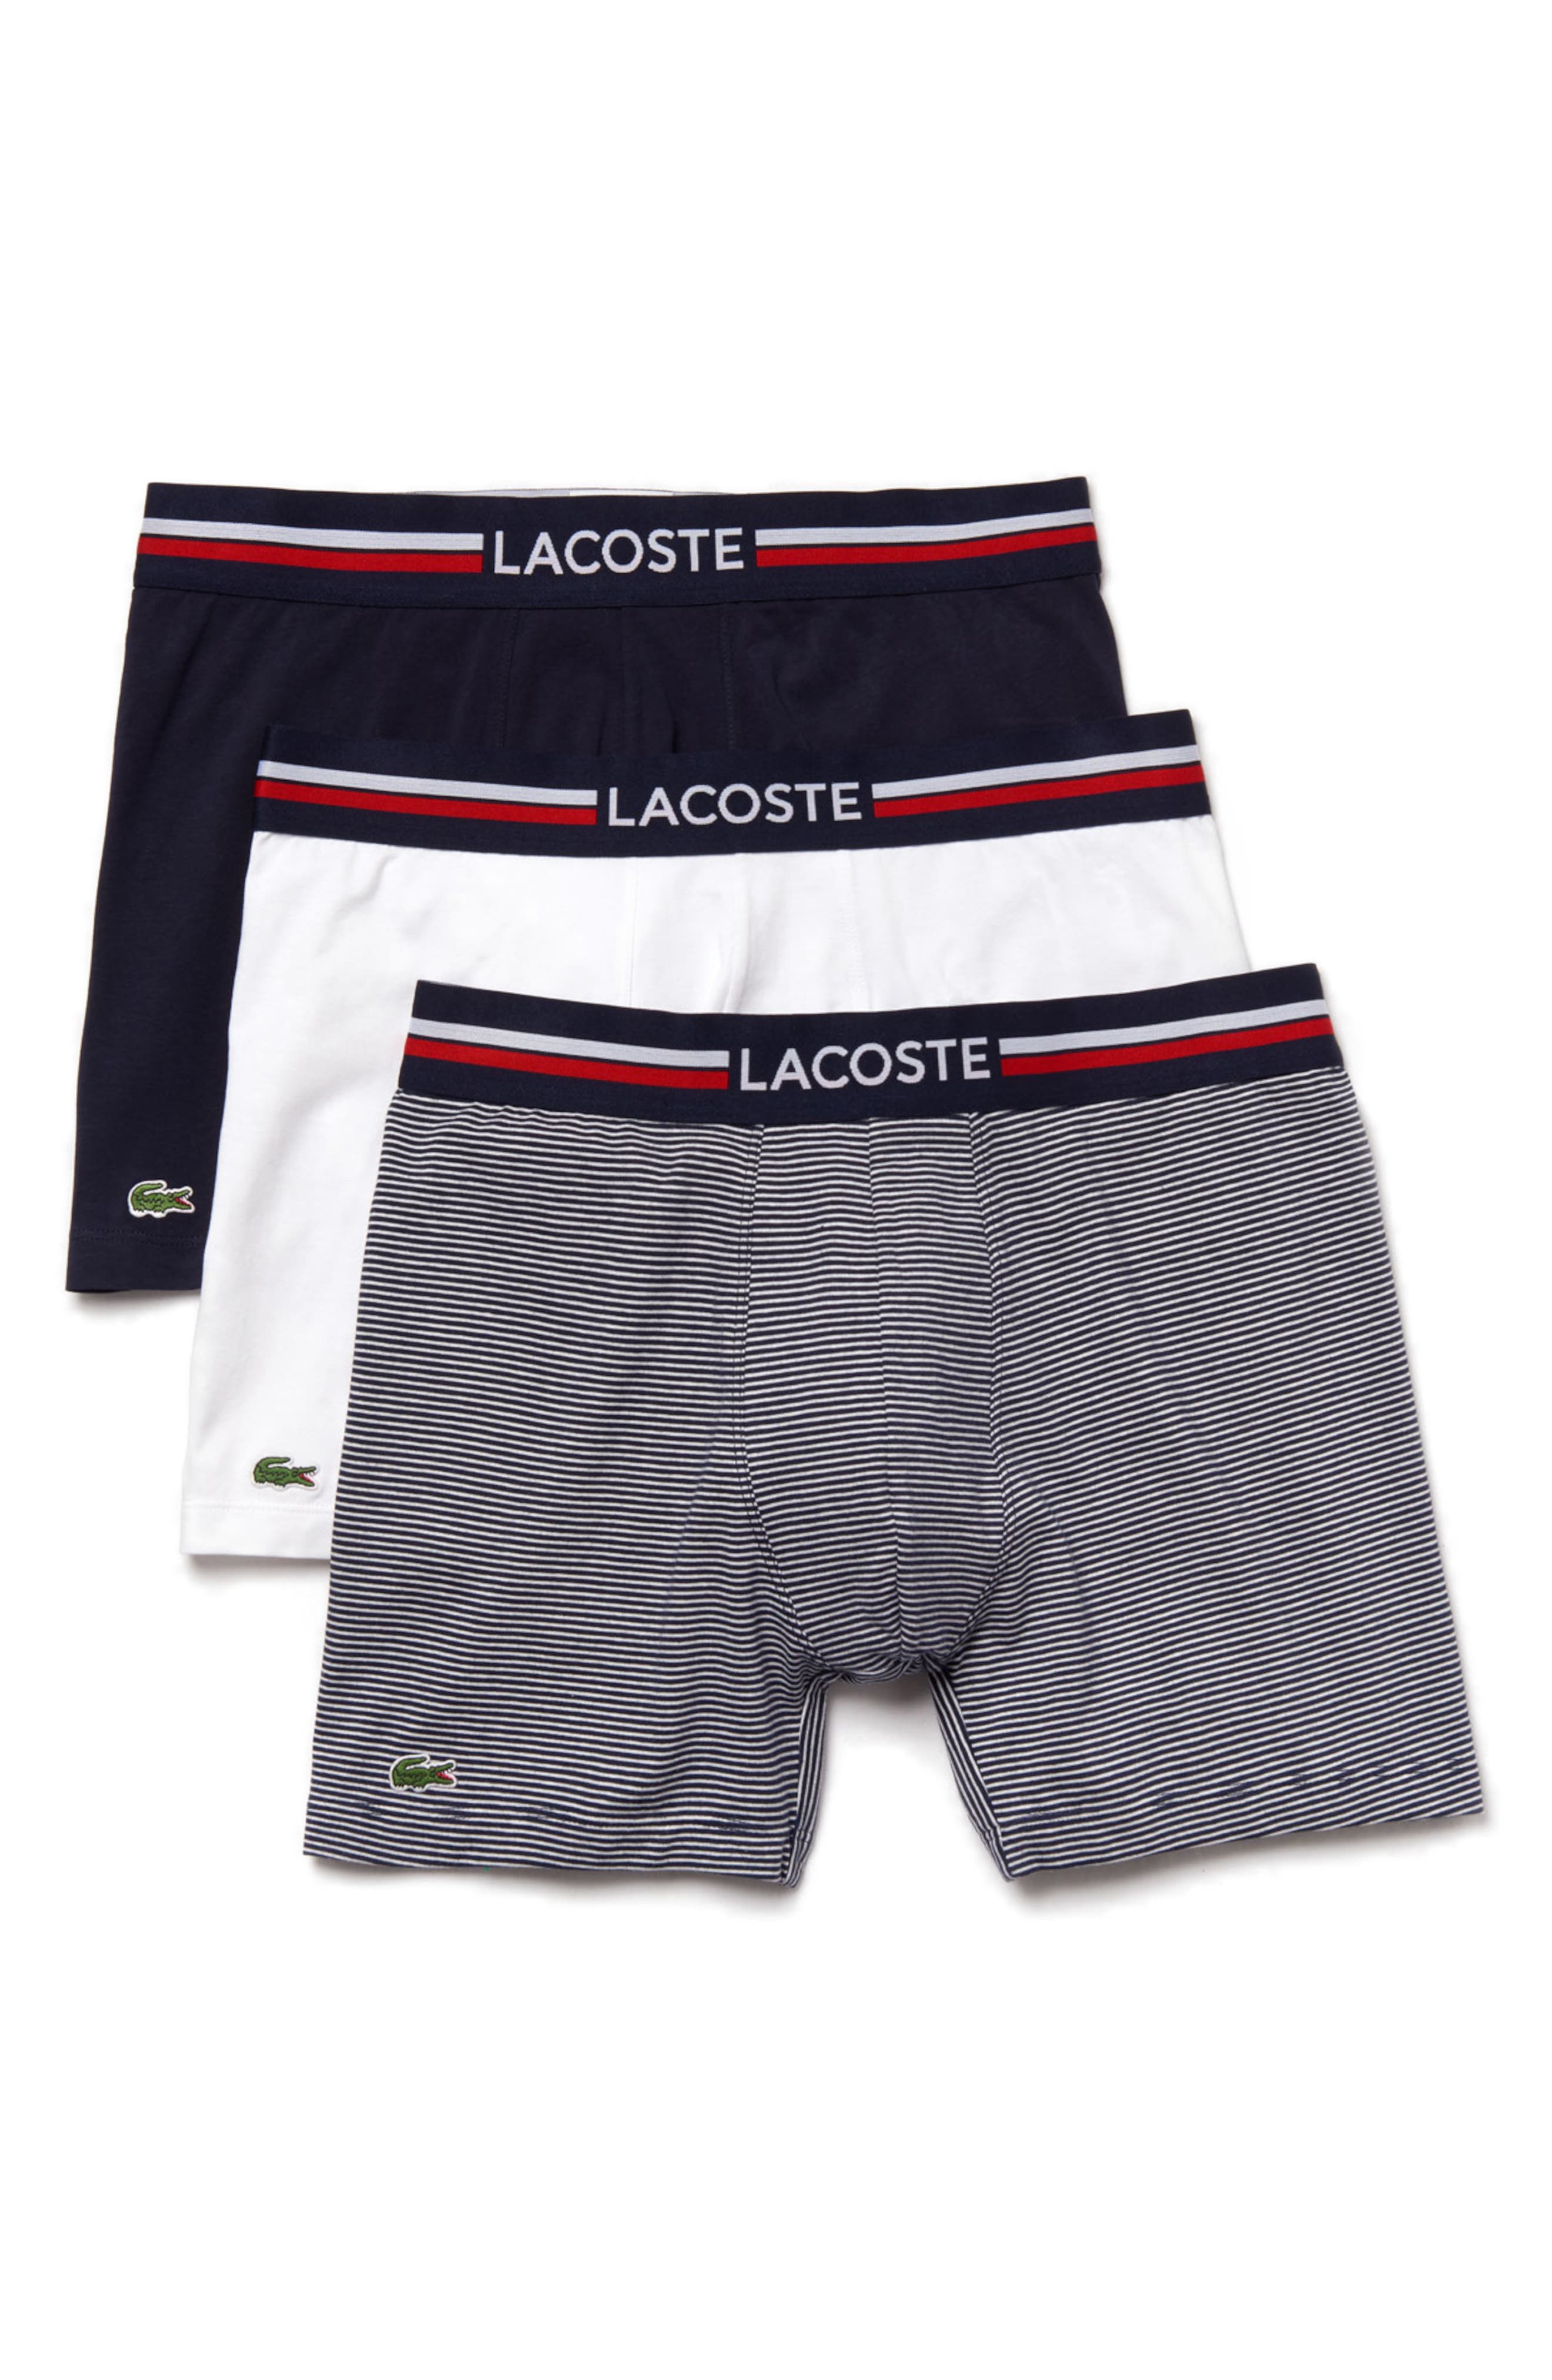 Lacoste Mens Boxer Shorts Pack of 3 Cotton Stretch Colours red/Marine/Black